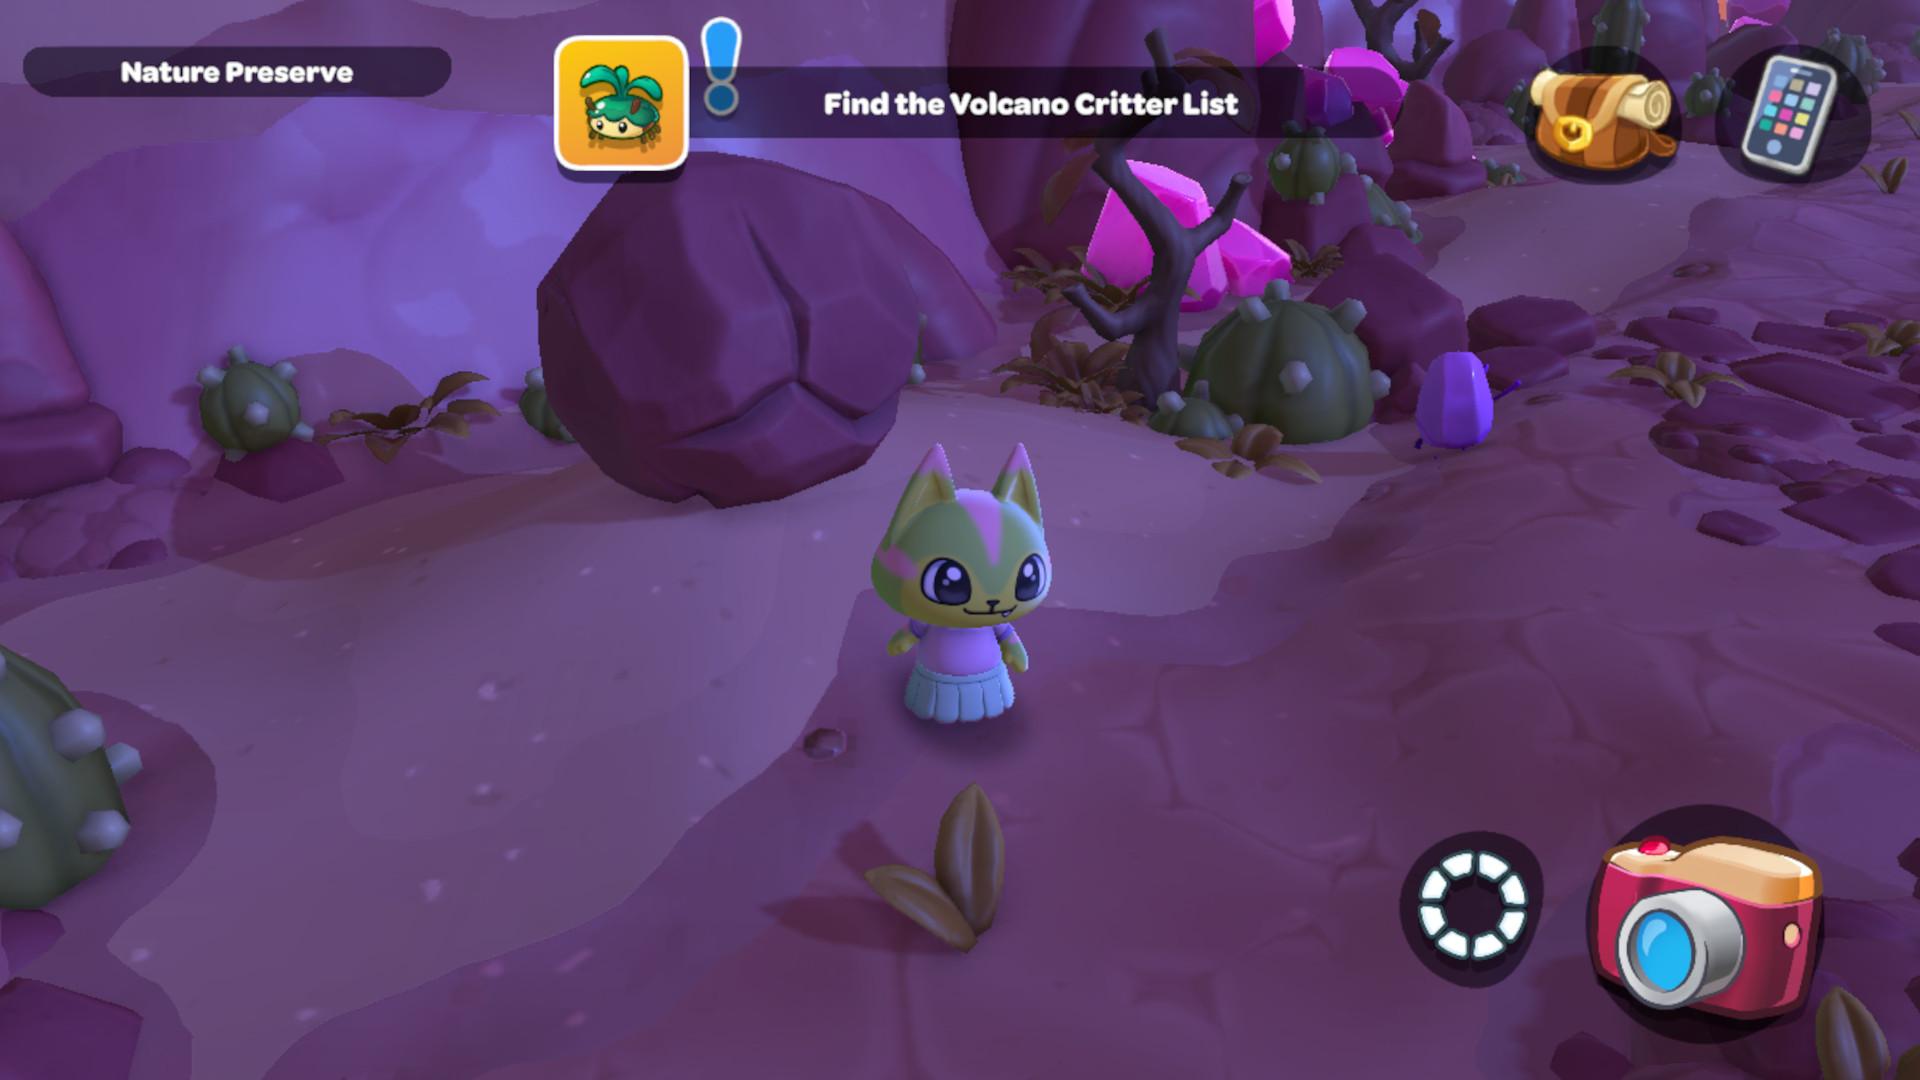 Hello Kitty Island Adventure critter list: A screenshot from HKIA showing a green and pink cat character at night in front of a large, cracked boulder. Text on the screen reads